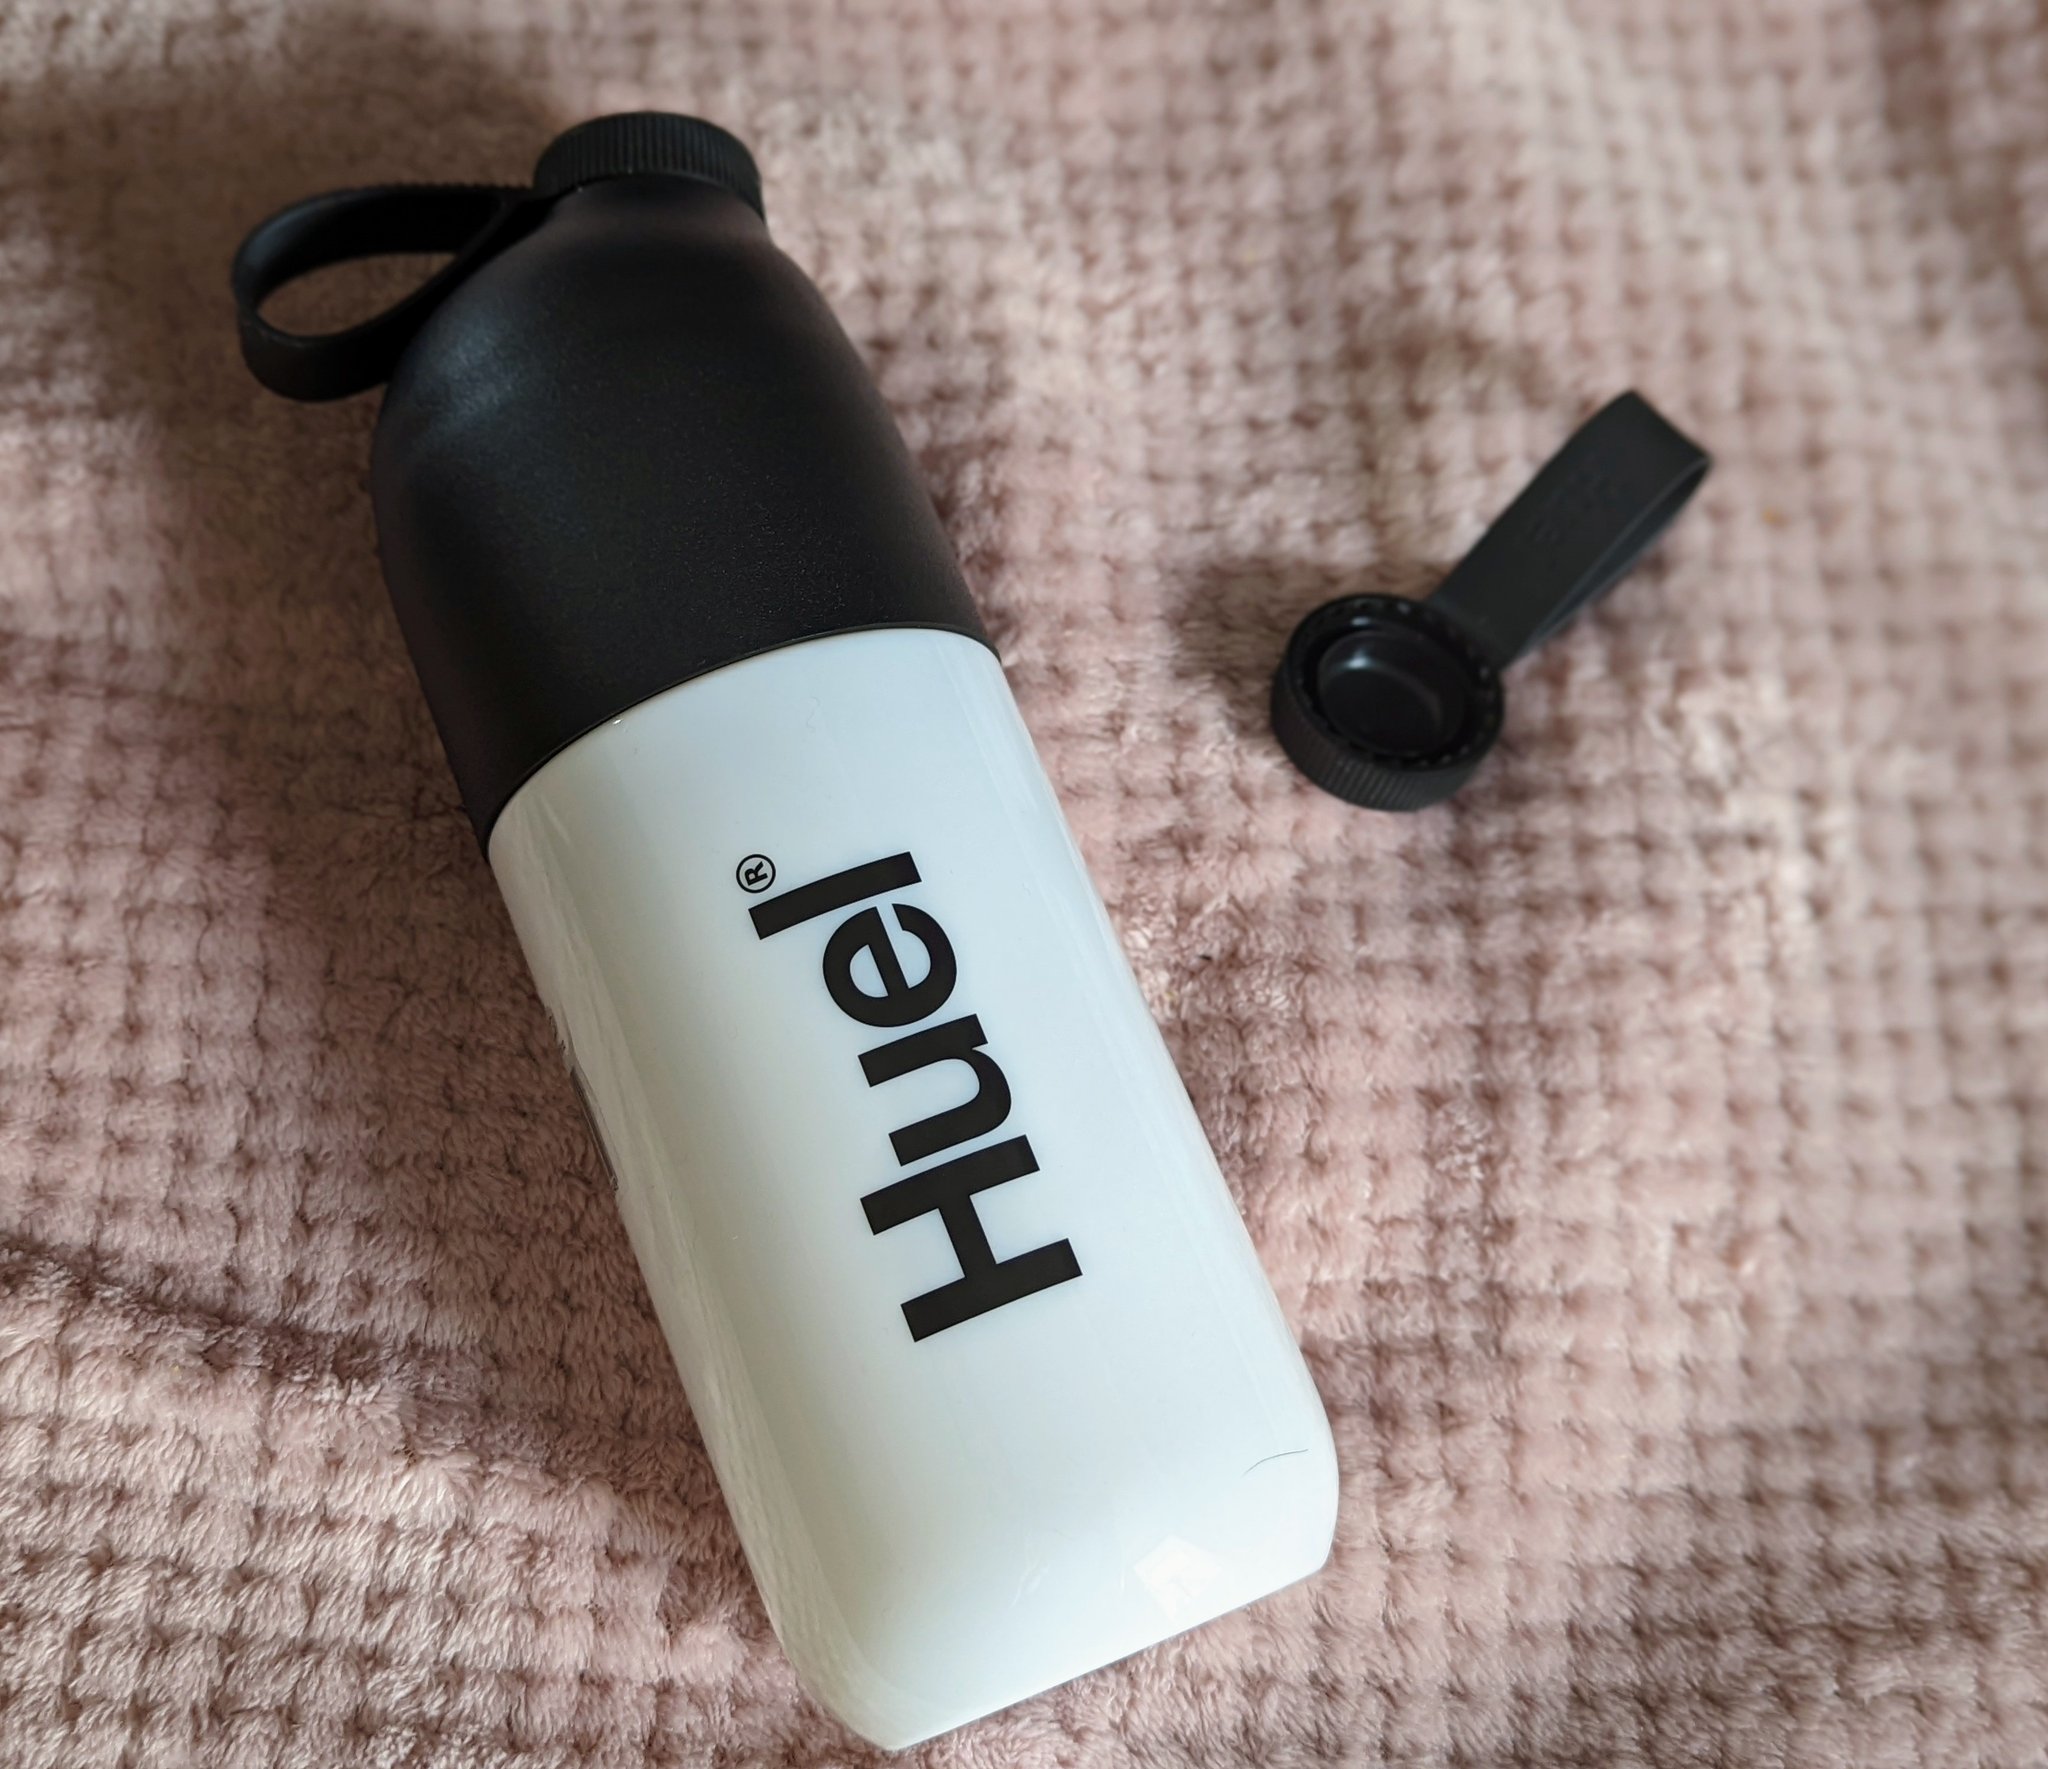 EternalStephHD on X: Not only did @huel send me a replacement cap